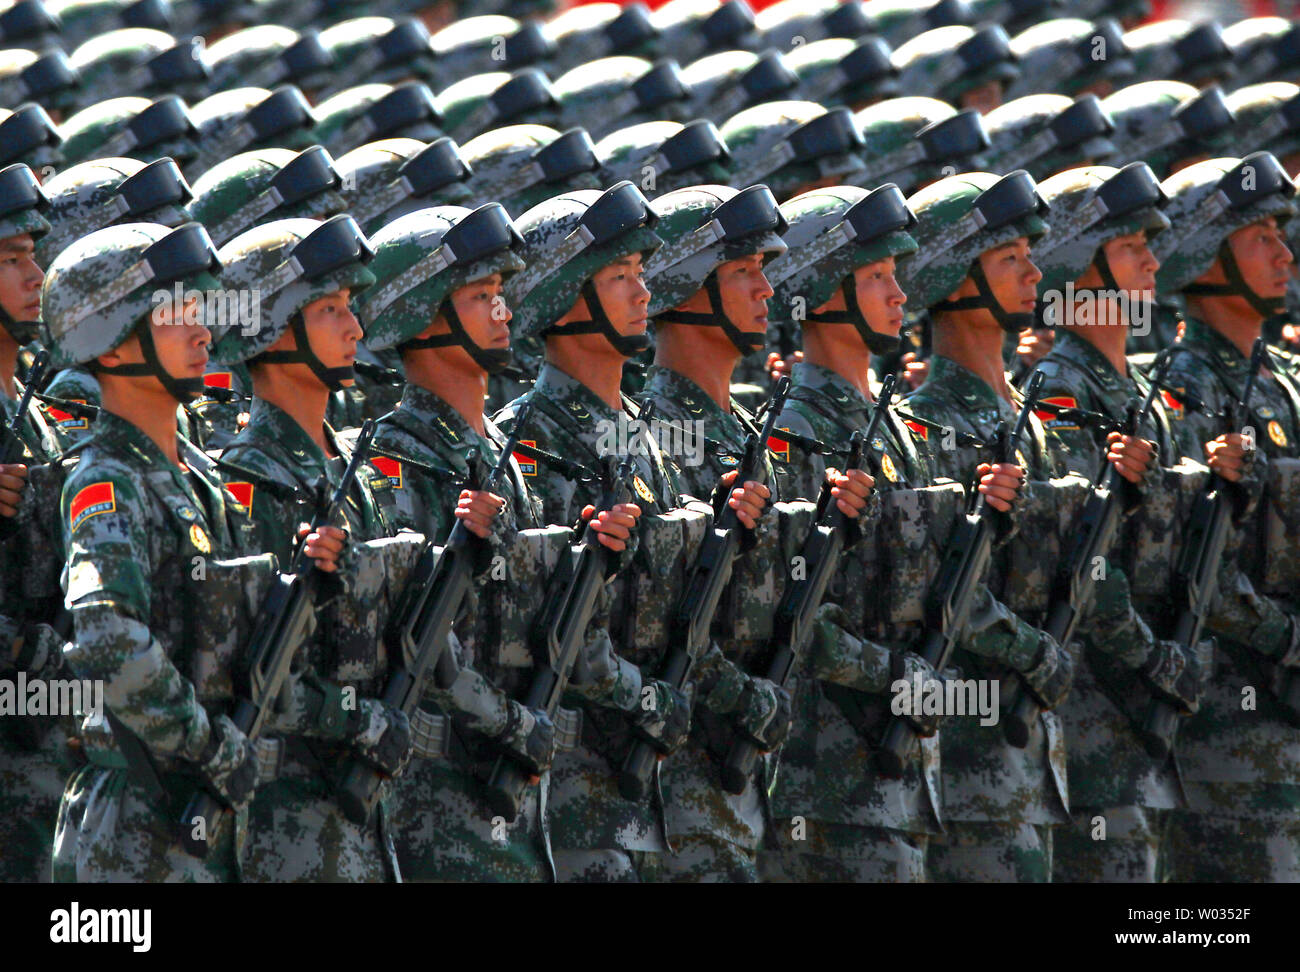 Over 12,000 soldiers and hundreds of tanks, ballistic missile launchers, amphibious assault vehicles, drones, fighter jets, helicopters and other military equipment participate in a massive parade marking the 70th anniversary of victory over Japan and the end of World War II in Beijing on September 3, 2015. Presiding over the extravaganza, President Xi Jinping, China's most powerful leader in decades, said that China would remain committed to 'the path of peaceful development' and unexpectedly vowed to cut 300,000 troops from its 2.3-million strong military -  the world's largest. Photo by Ste Stock Photo